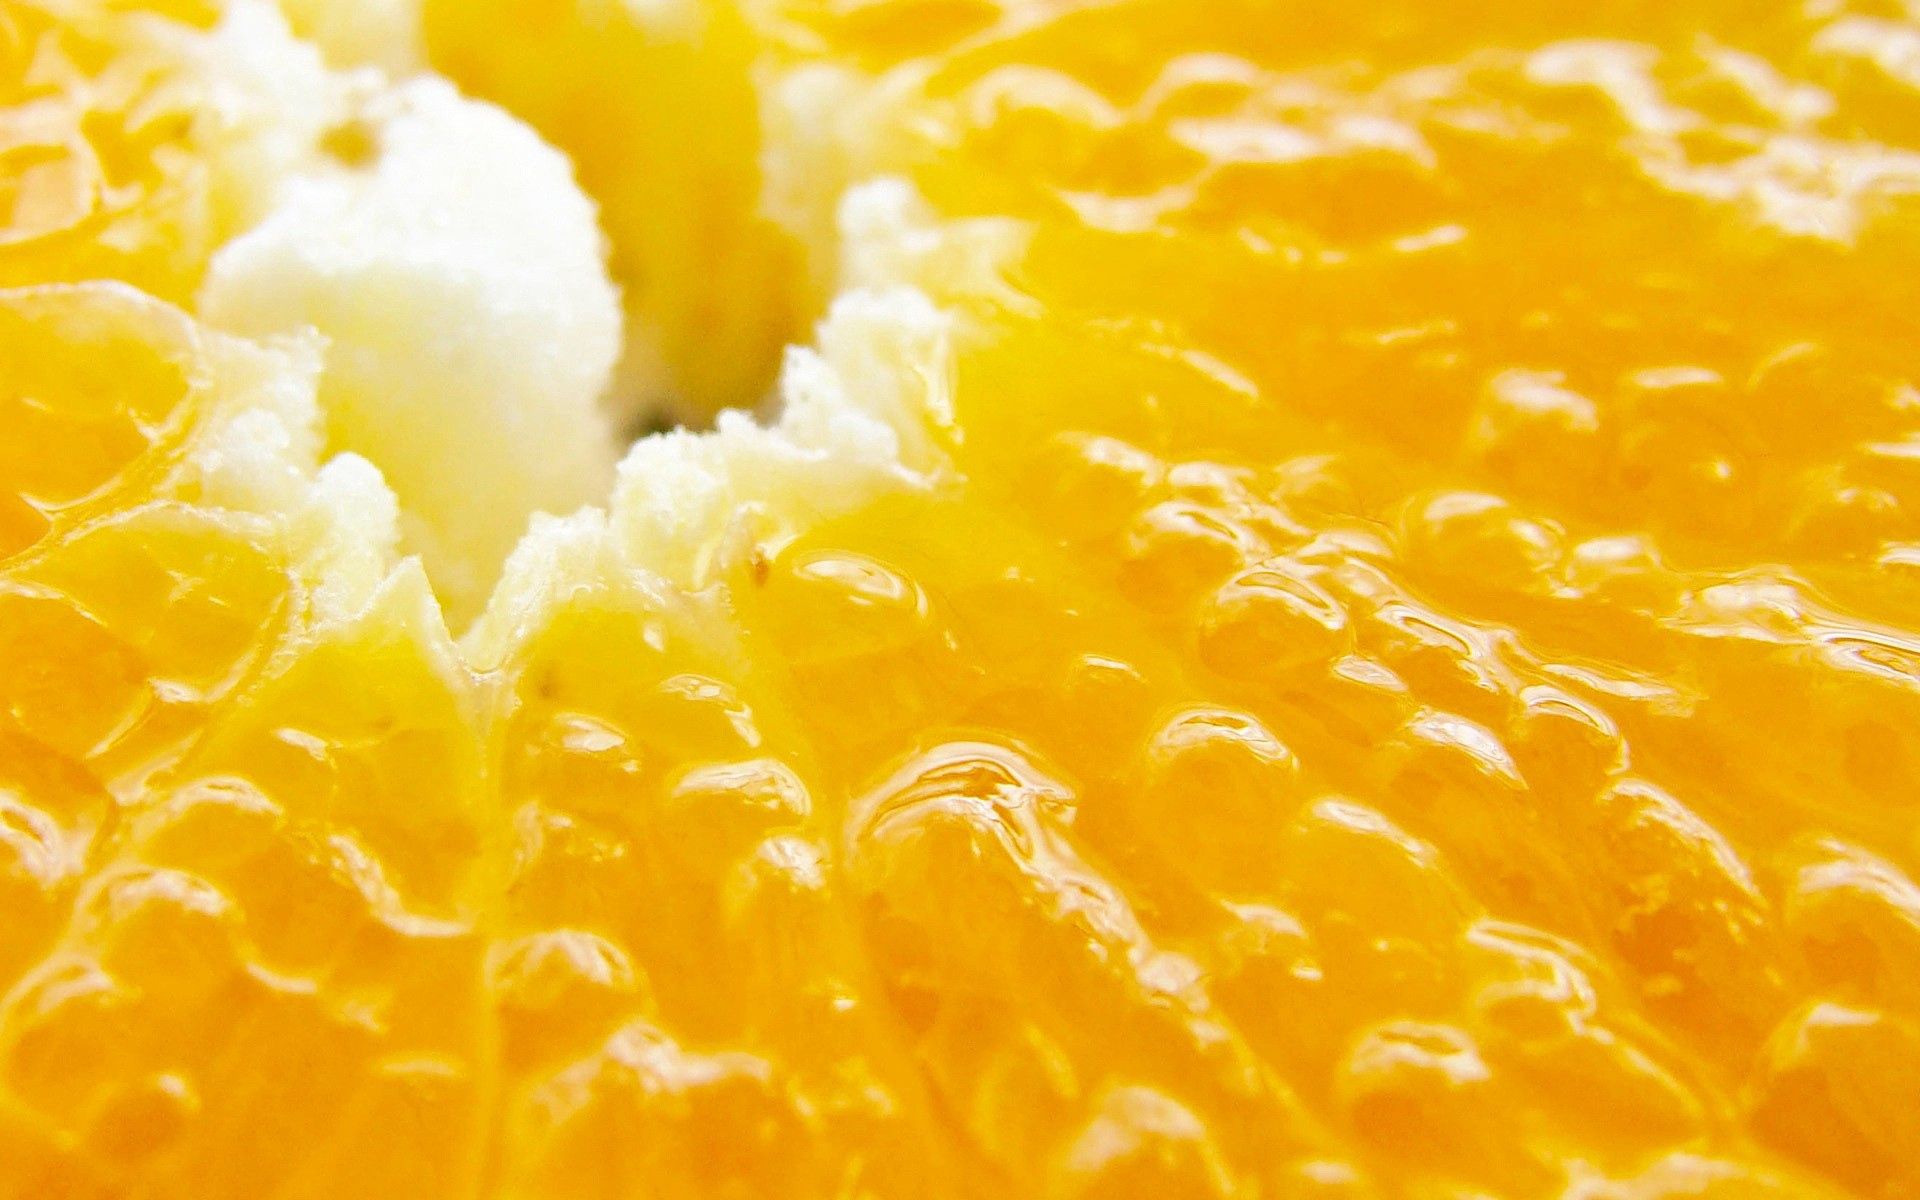 120735 Screensavers and Wallpapers Tasty for phone. Download orange, macro, fruit, tasty, delicious pictures for free